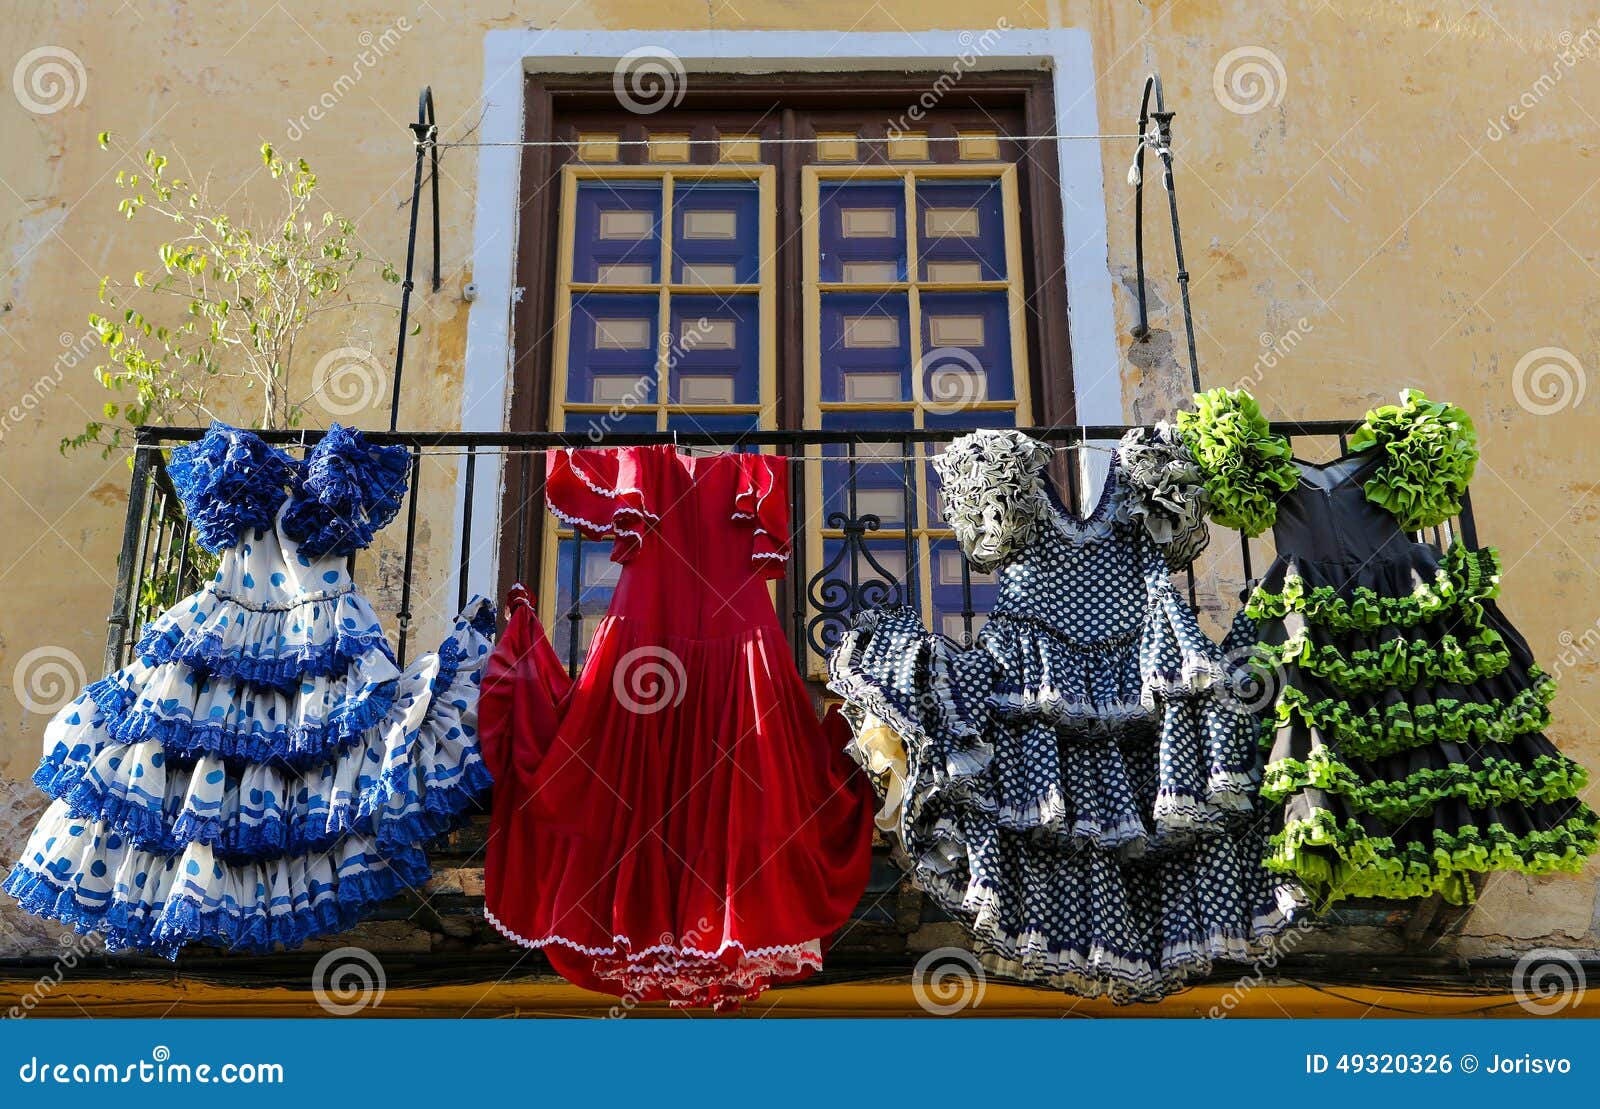 traditional flamenco dresses at a house in malaga, andalusia, sp